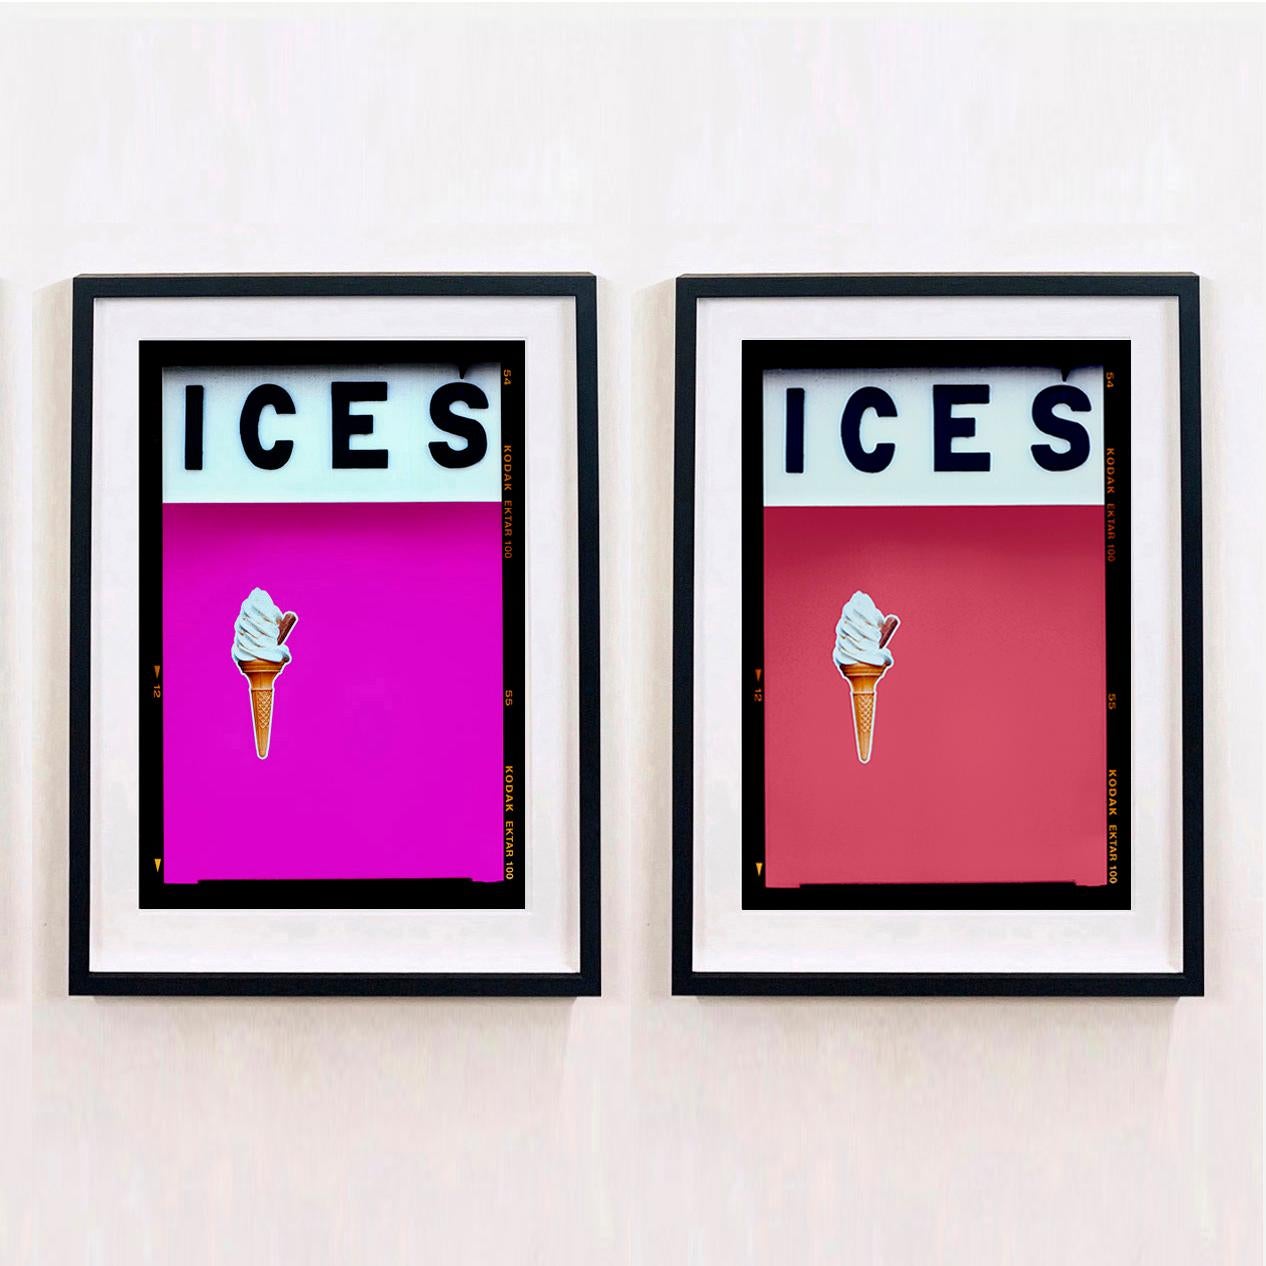 ICES, by Richard Heeps, photographed at the British Seaside at the end of summer 2020. This artwork is about evoking memories of the simple joy of days by the beach. The raspberry pink color blocking, typography and the surreal twist of the